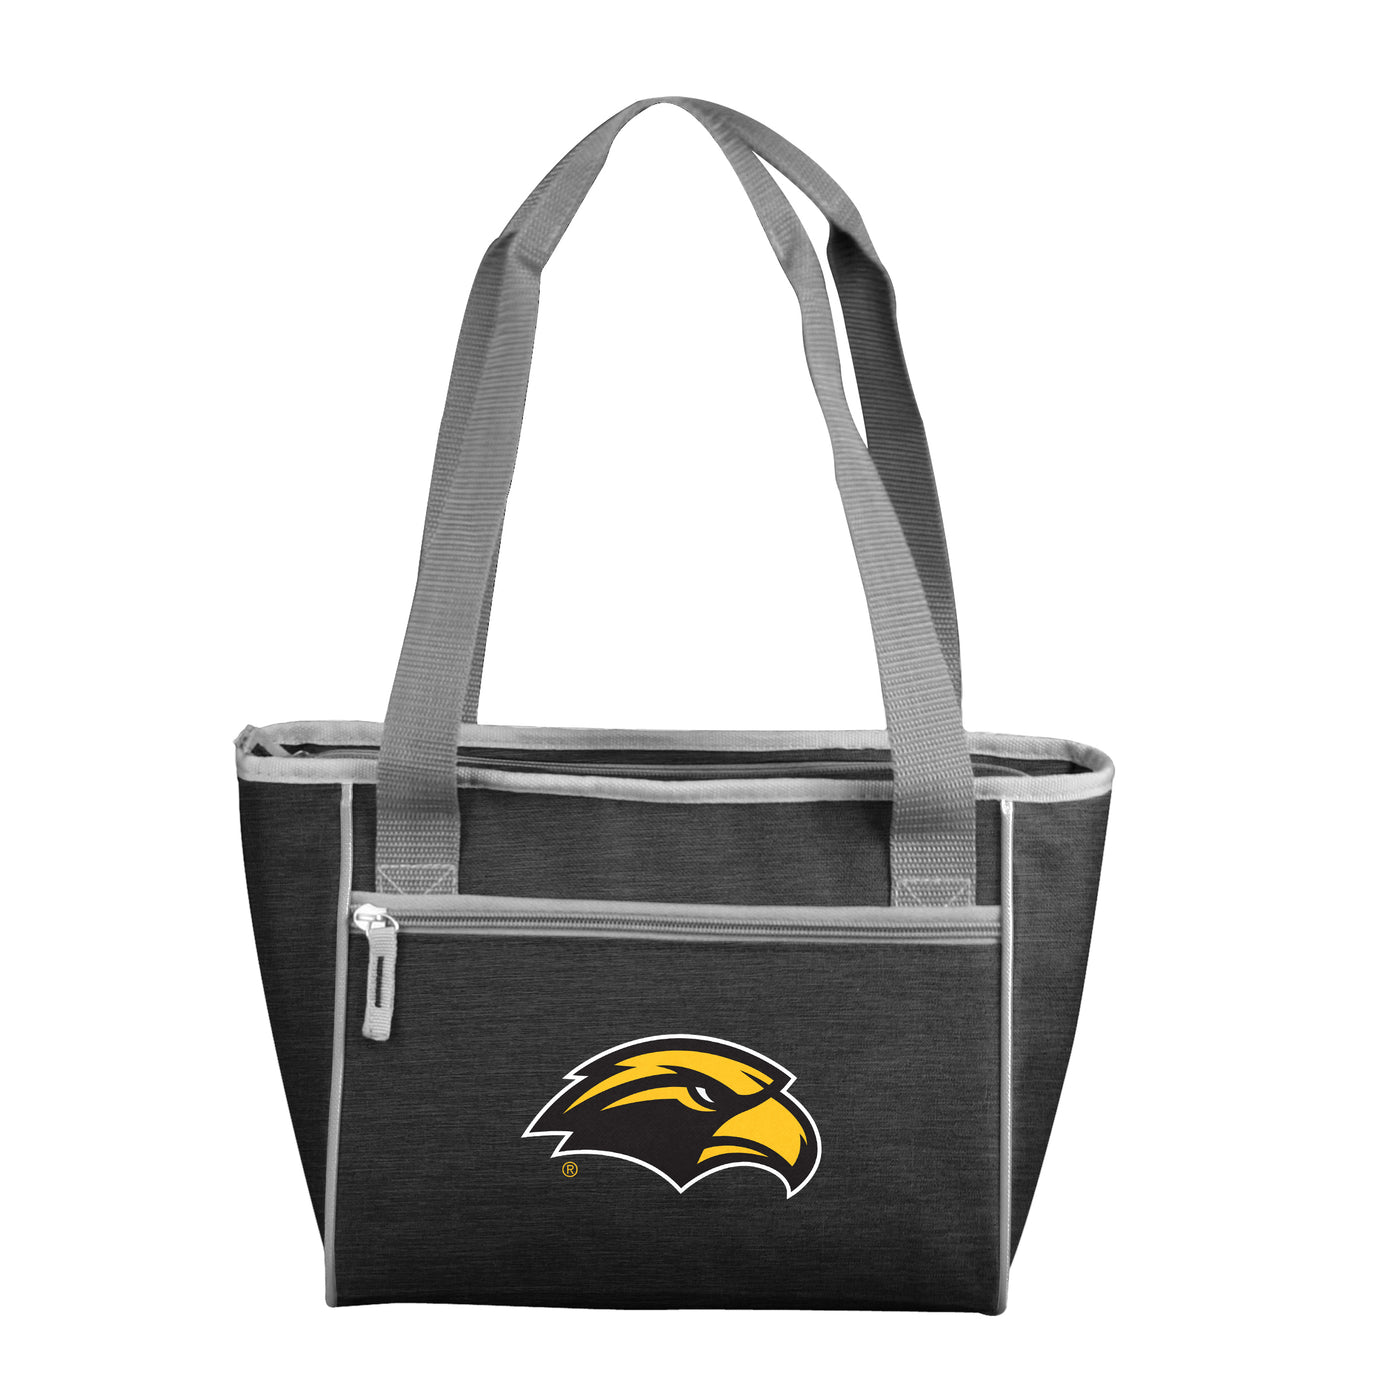 Southern Miss Crosshatch 16 Can Cooler Tote